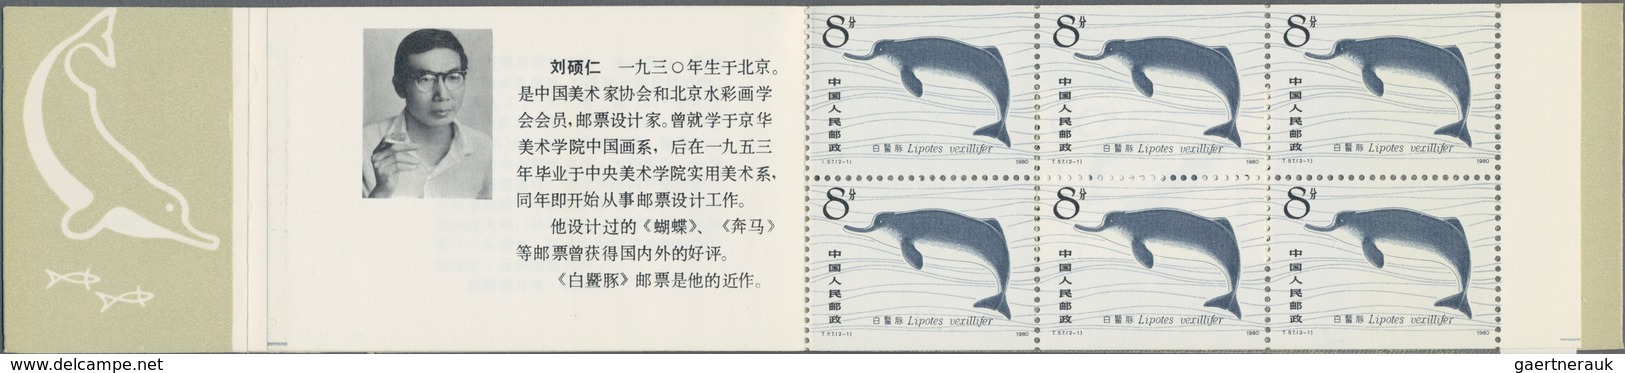 China - Volksrepublik: 1981, 4 SB2 Chinese River Dolphins booklet panes (Michel €440).